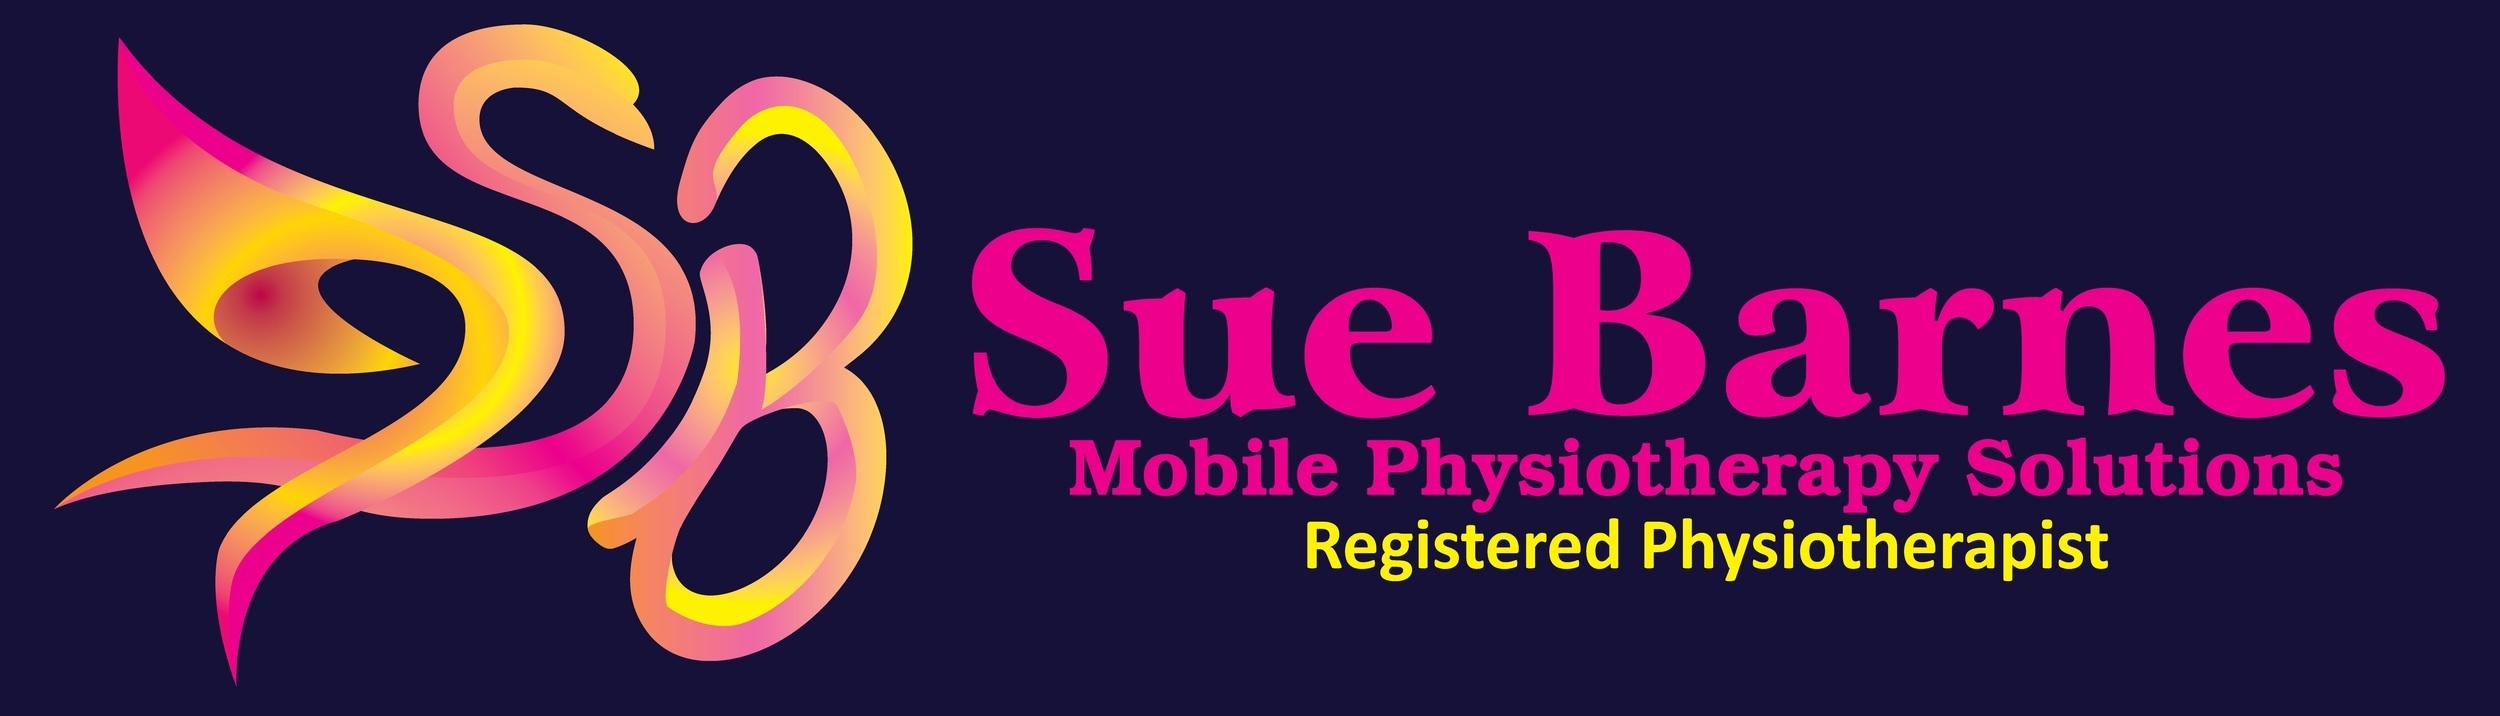 Mobile Physiotherapy Solutions 